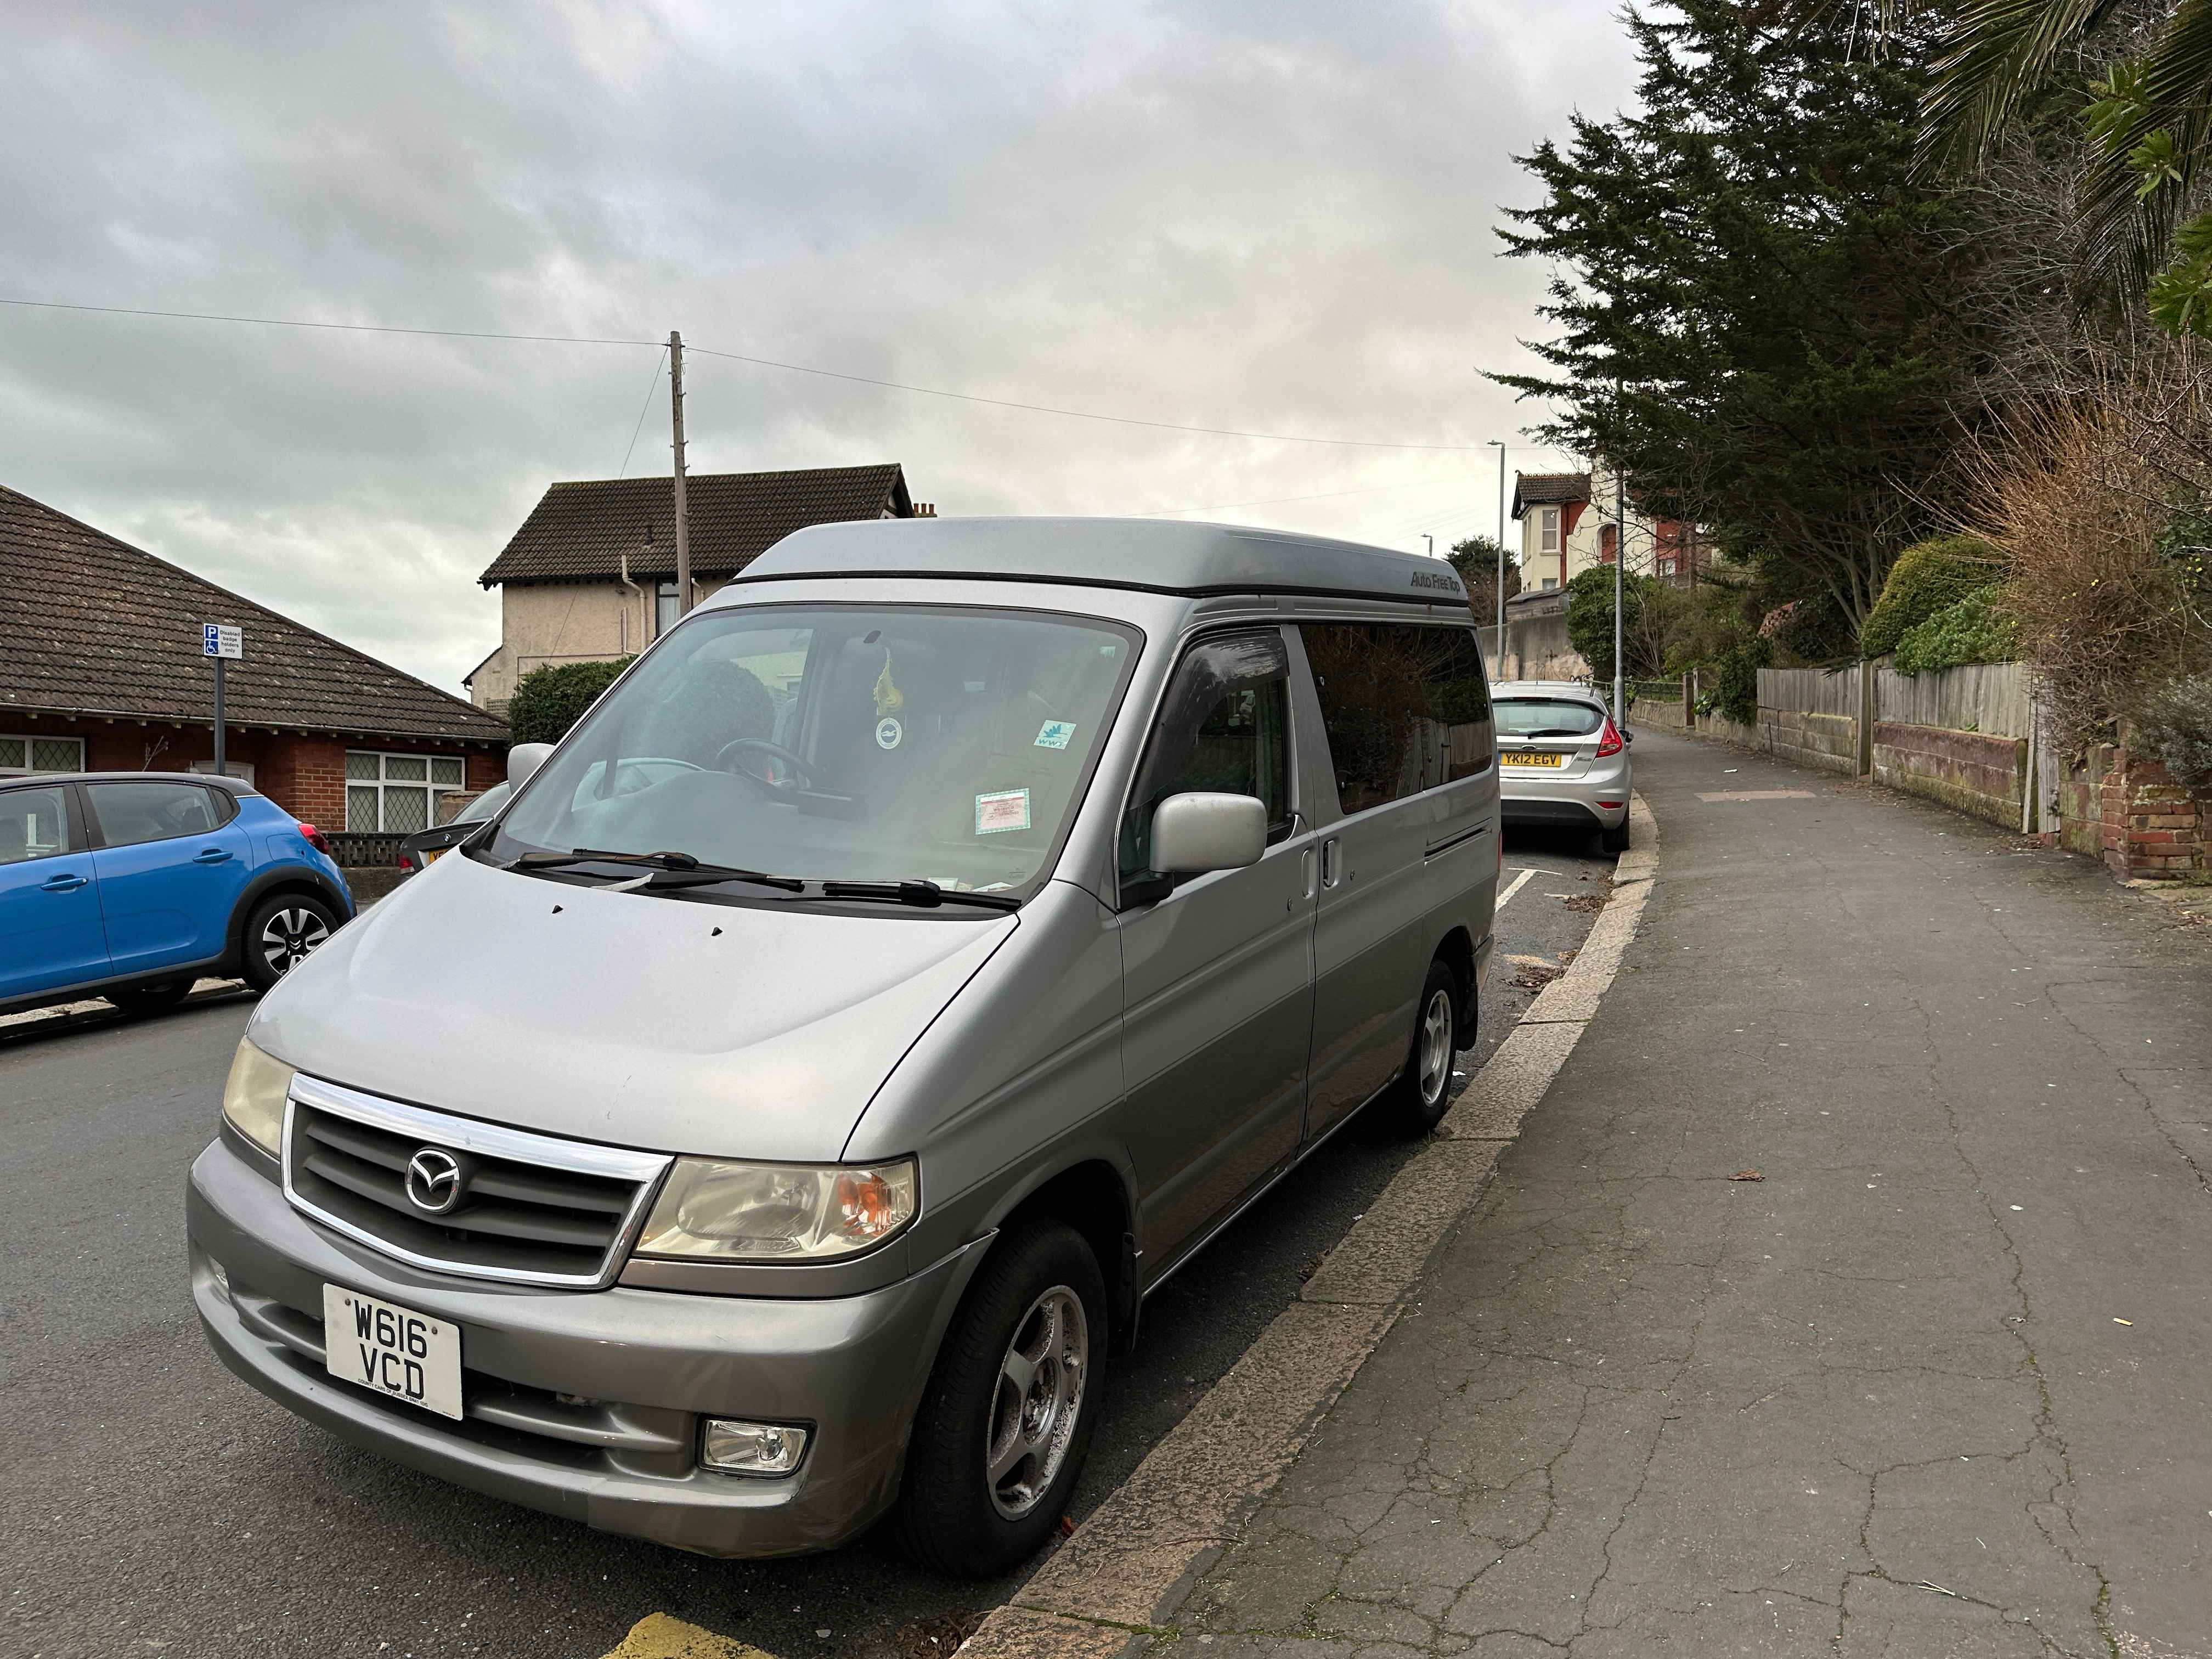 Photograph of W616 VCD - a Silver Mazda Bongo camper van parked in Hollingdean by a non-resident. The second of three photographs supplied by the residents of Hollingdean.